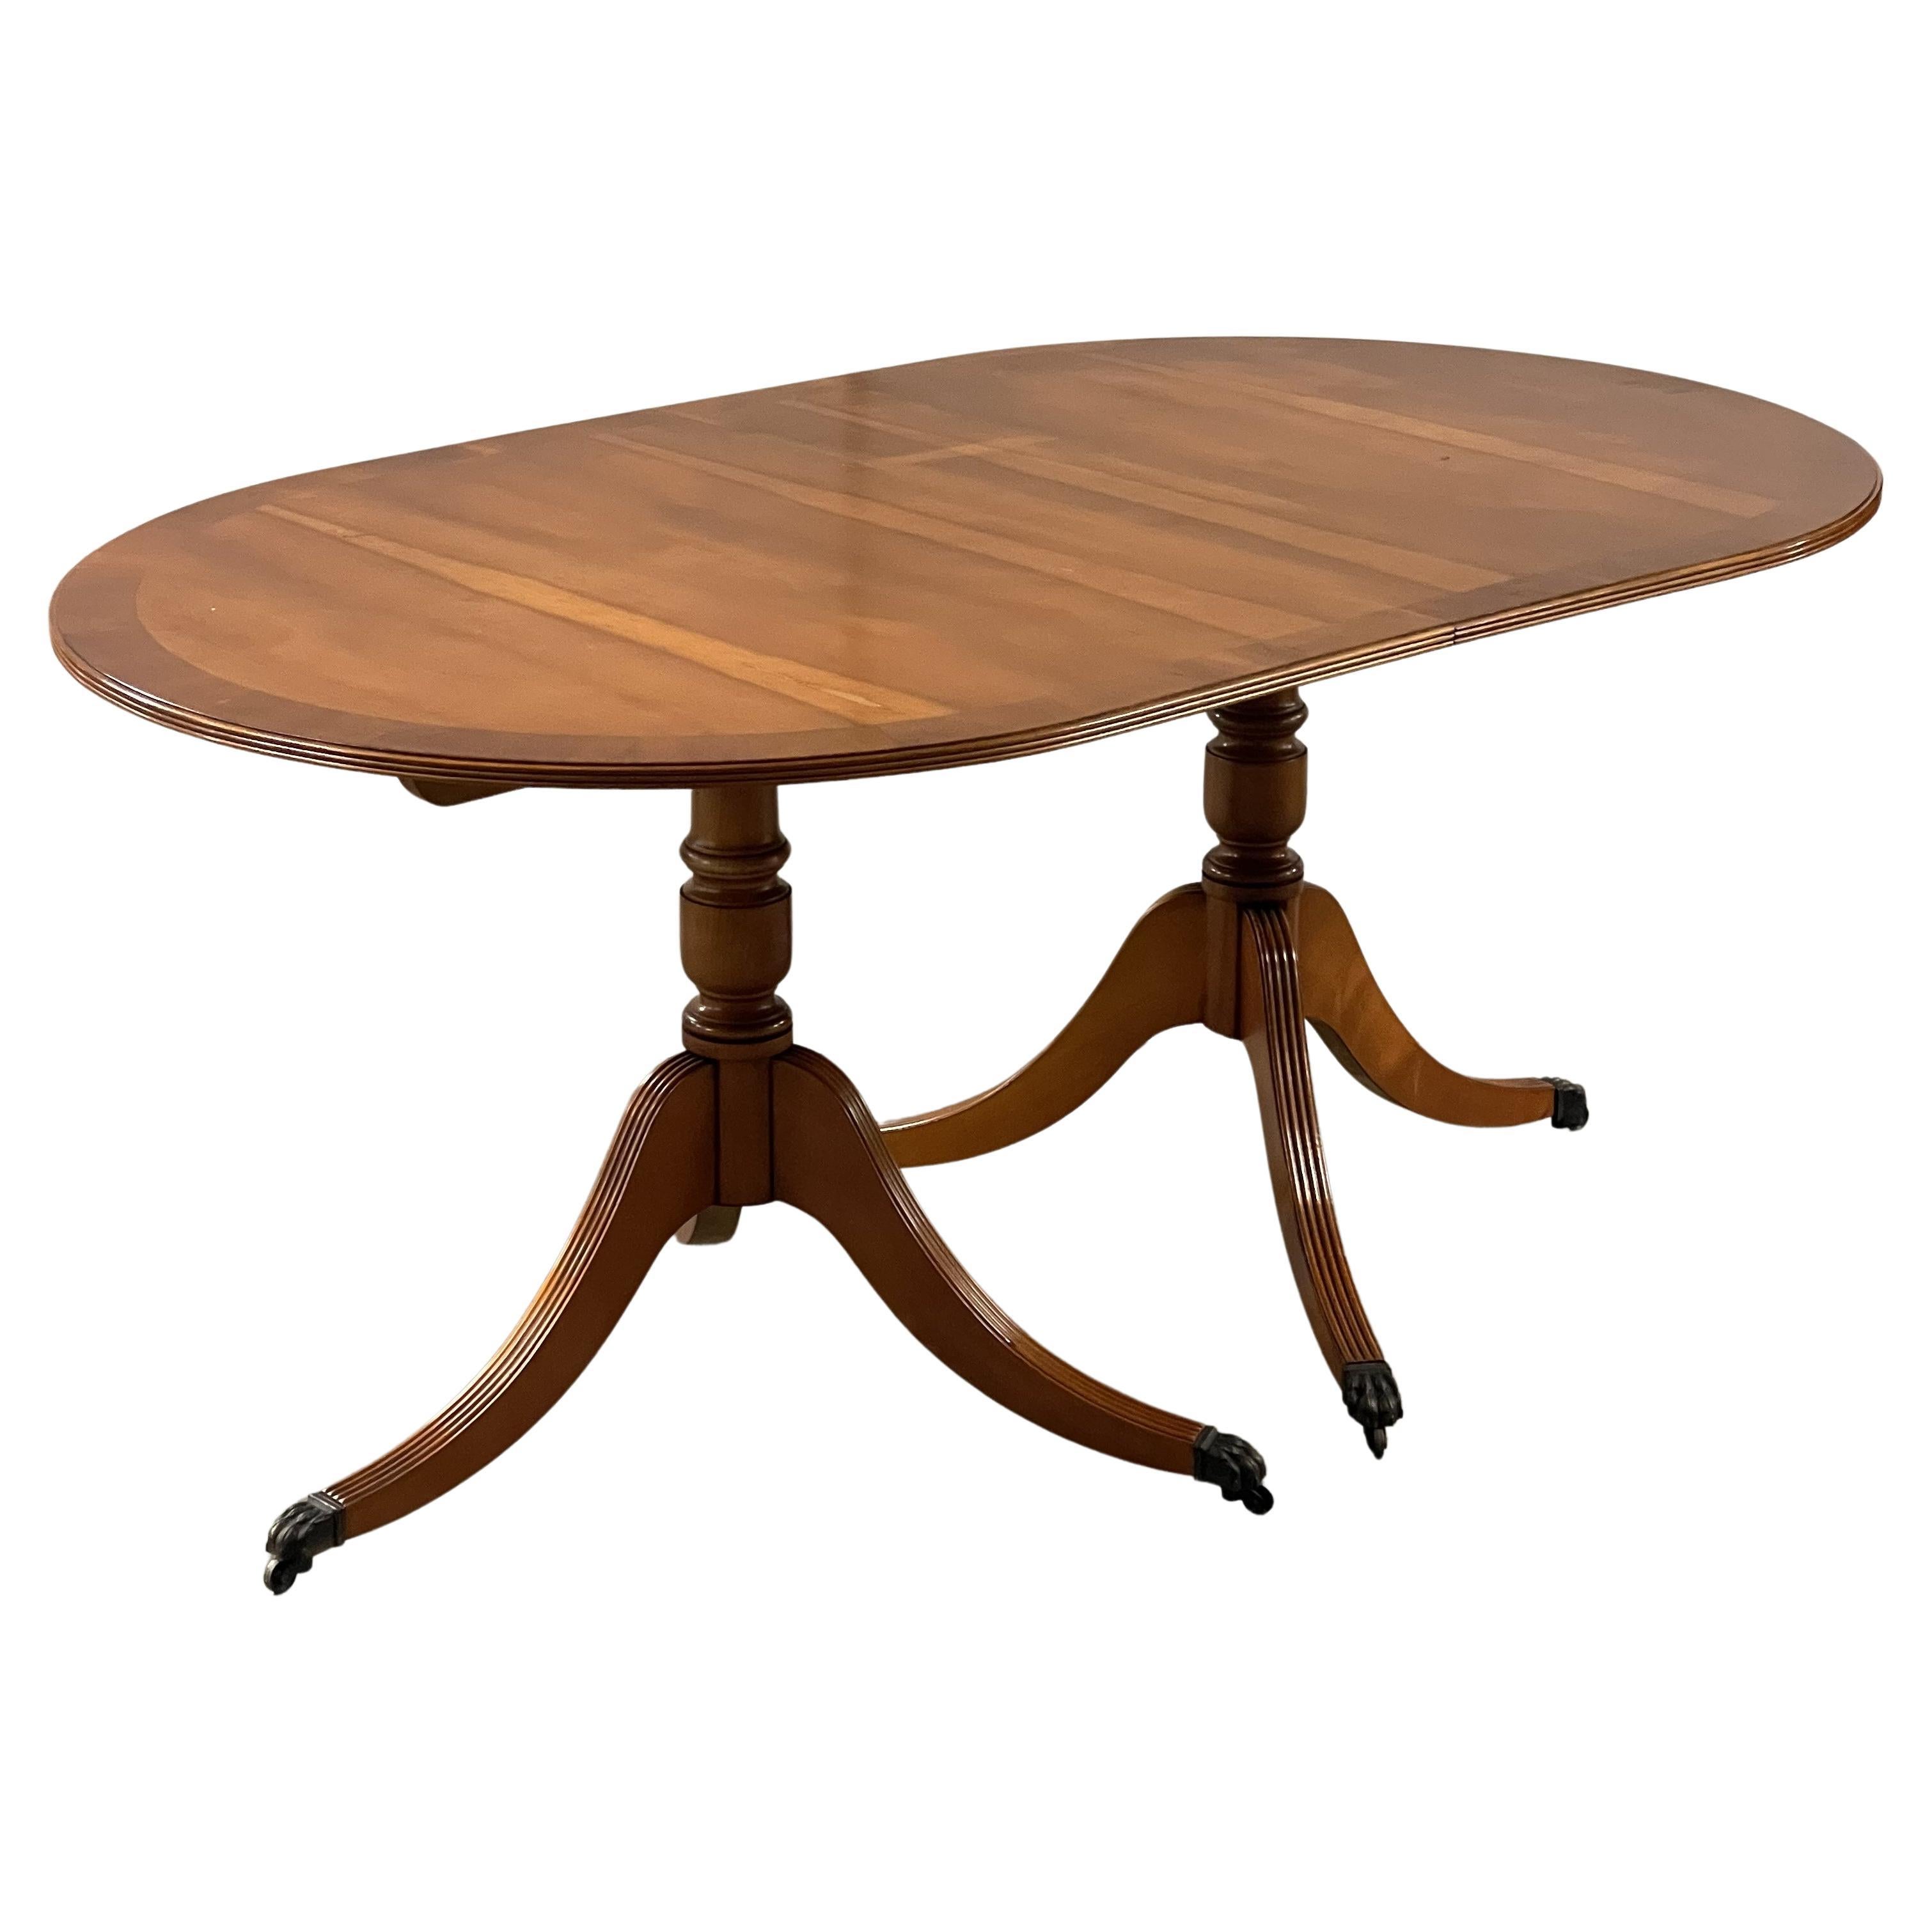 Vintage Yew Wood Twin Pedestal Extending Dining Table Seats 6-8 People For Sale